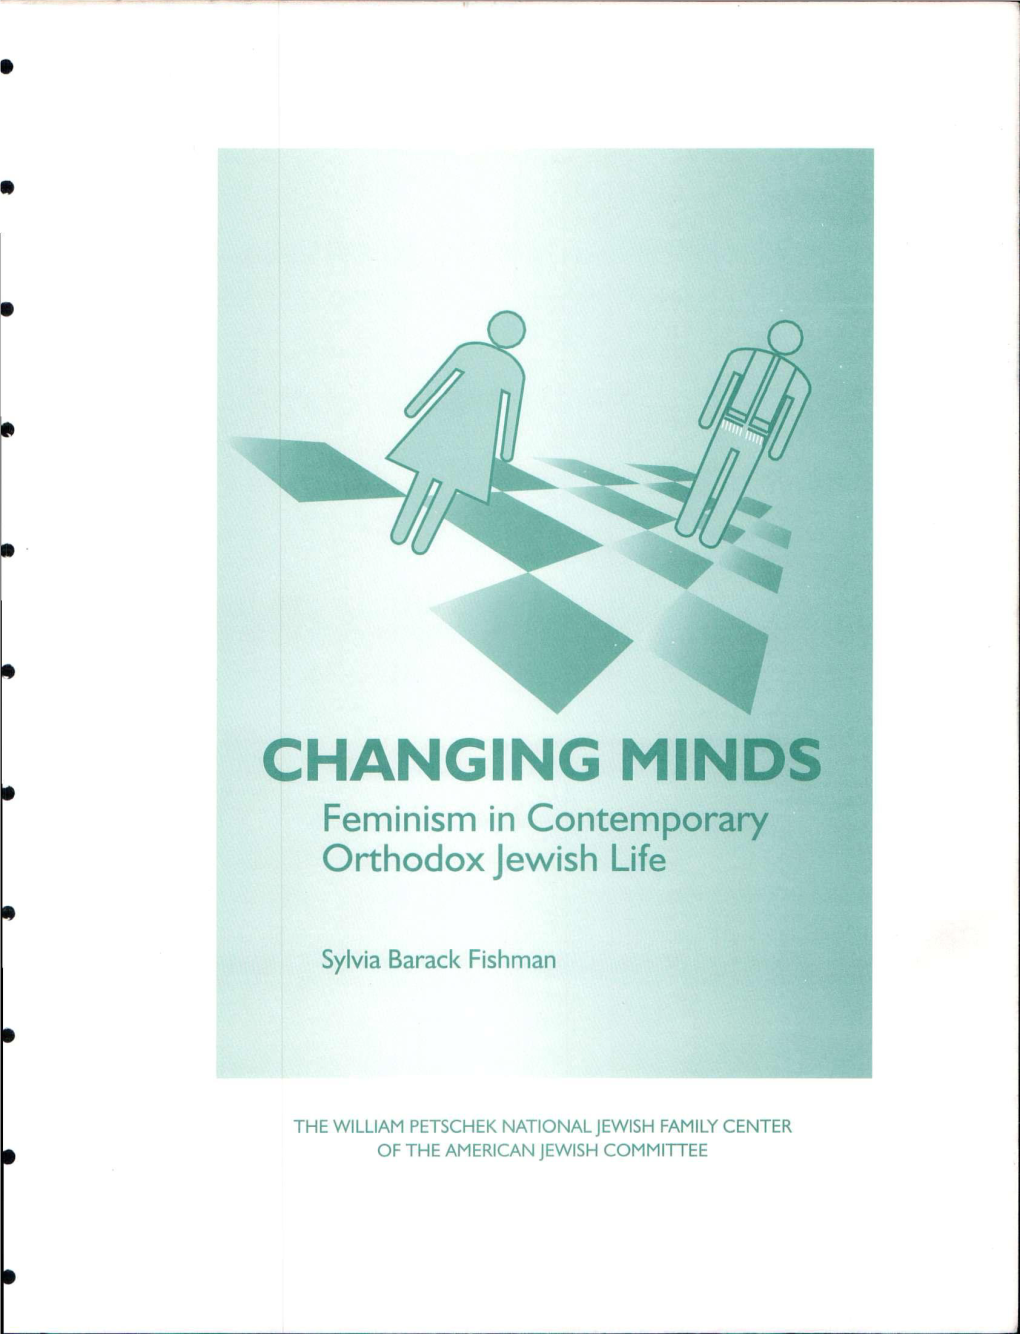 CHANGING MINDS Feminism in Contemporary Orthodox Jewish Life